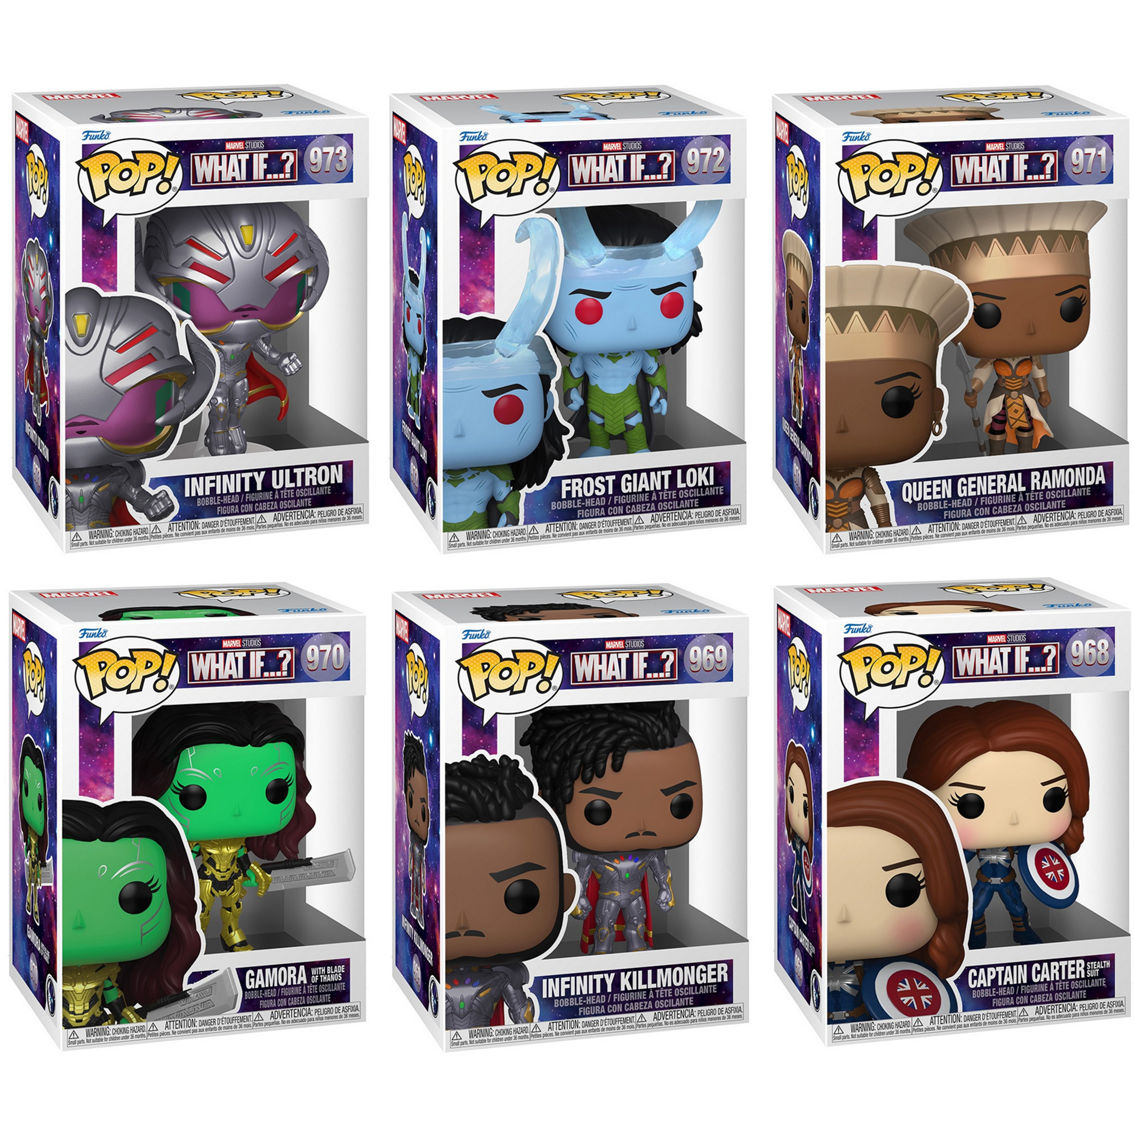 Funko POP! Marvel What If? Infinity Ultron Collectors' Set - Image 2 of 8